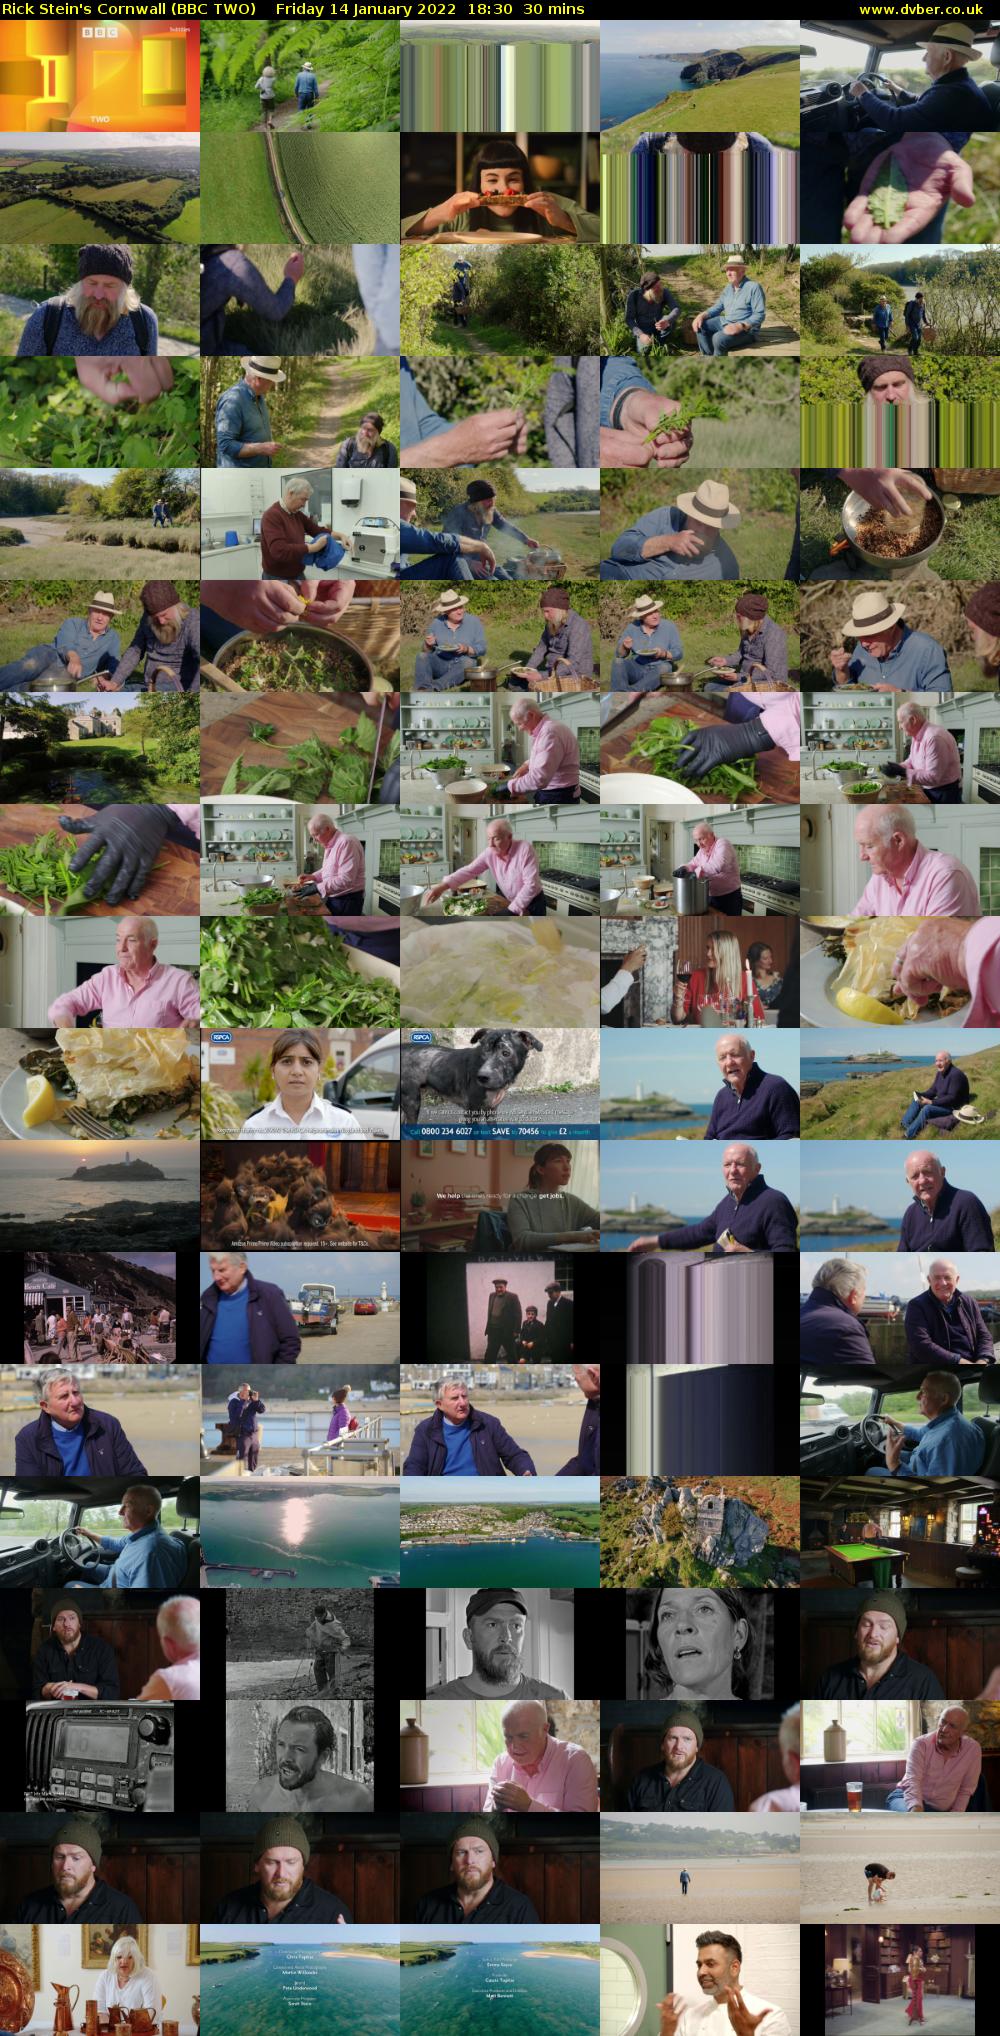 Rick Stein's Cornwall (BBC TWO) Friday 14 January 2022 18:30 - 19:00